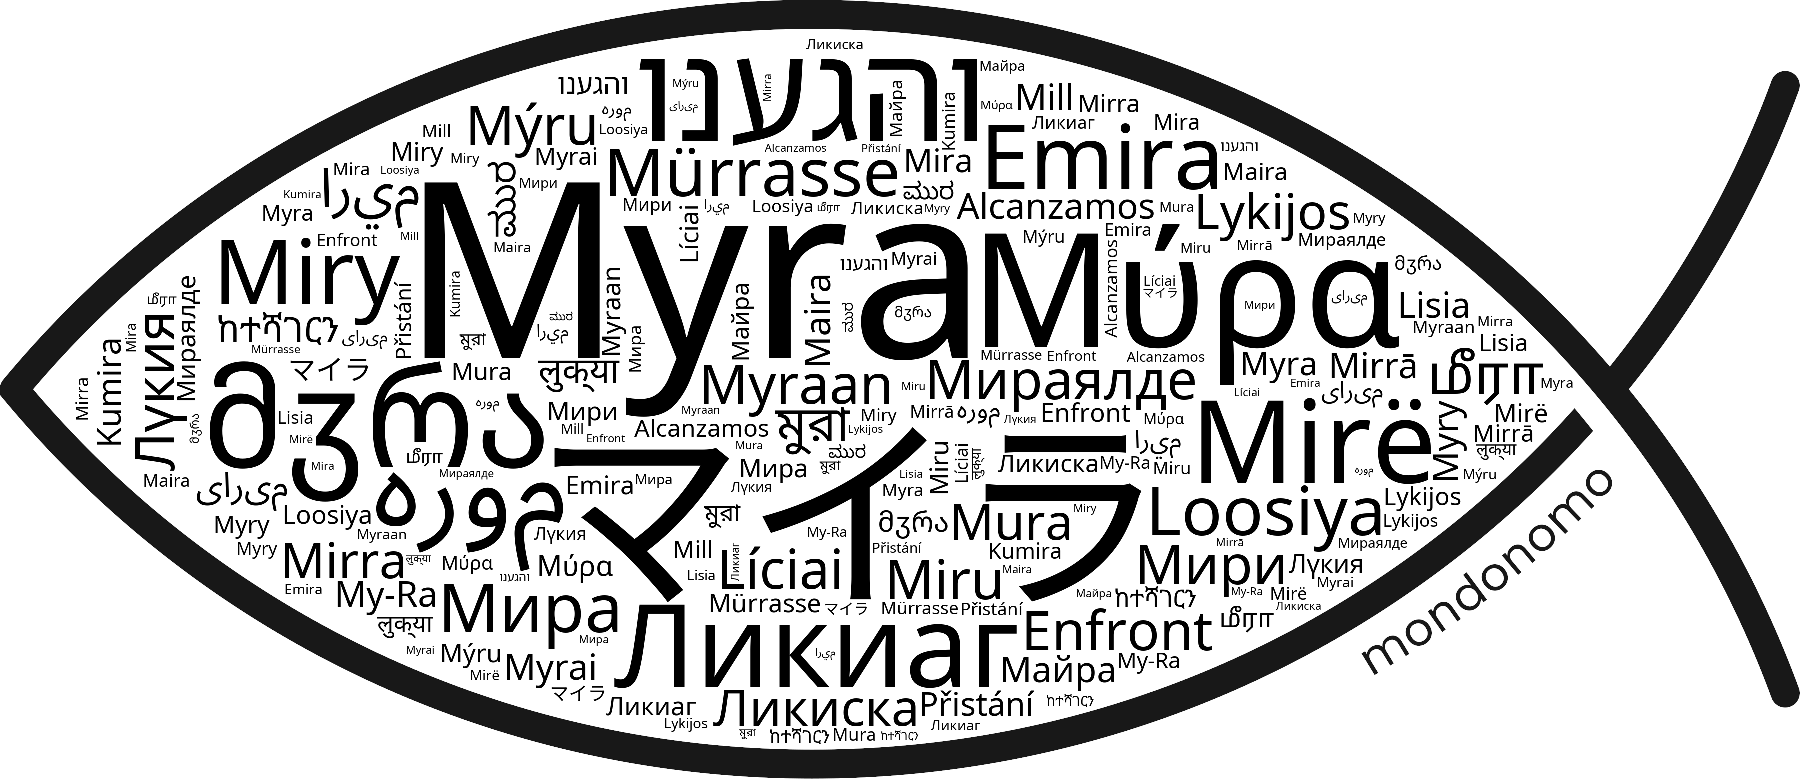 Name Myra in the world's Bibles